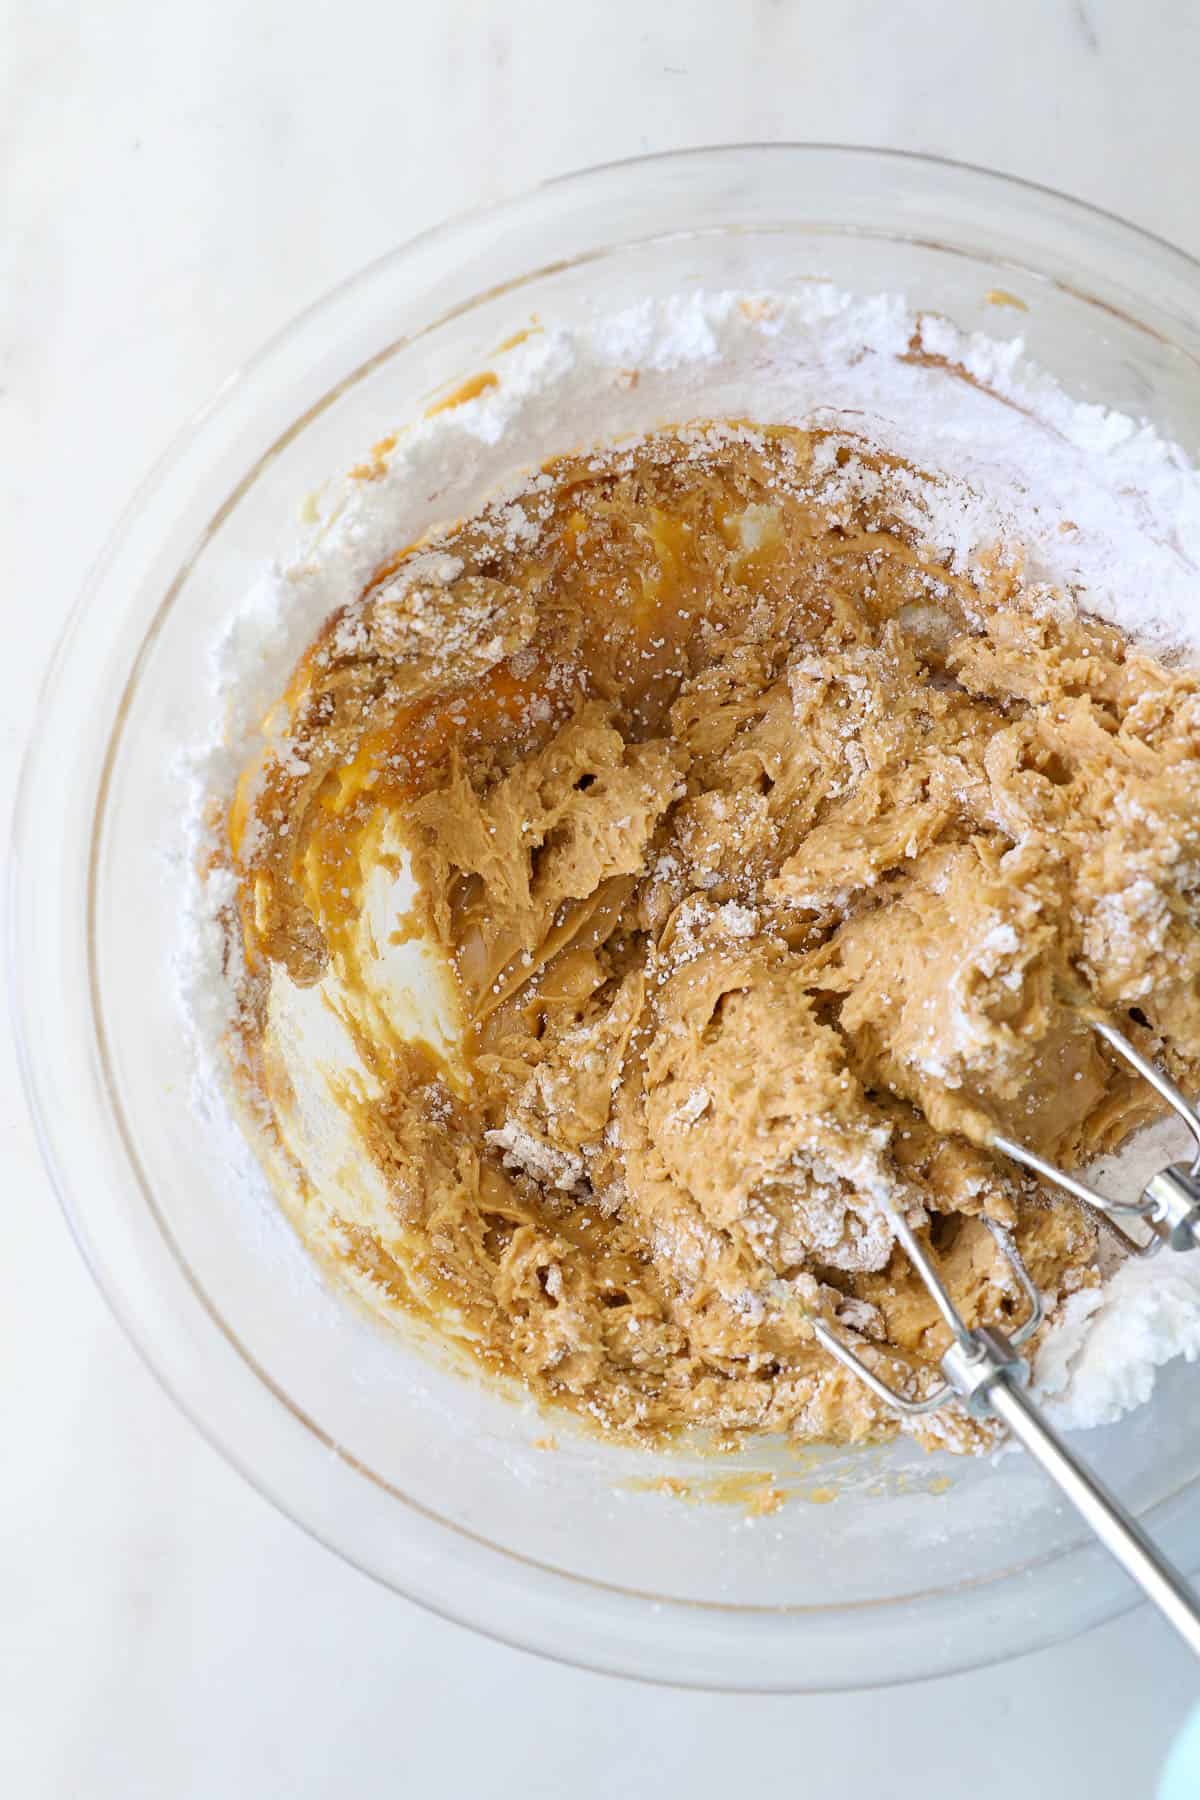 An electric mixer combines the peanut butter mixture in a bowl.